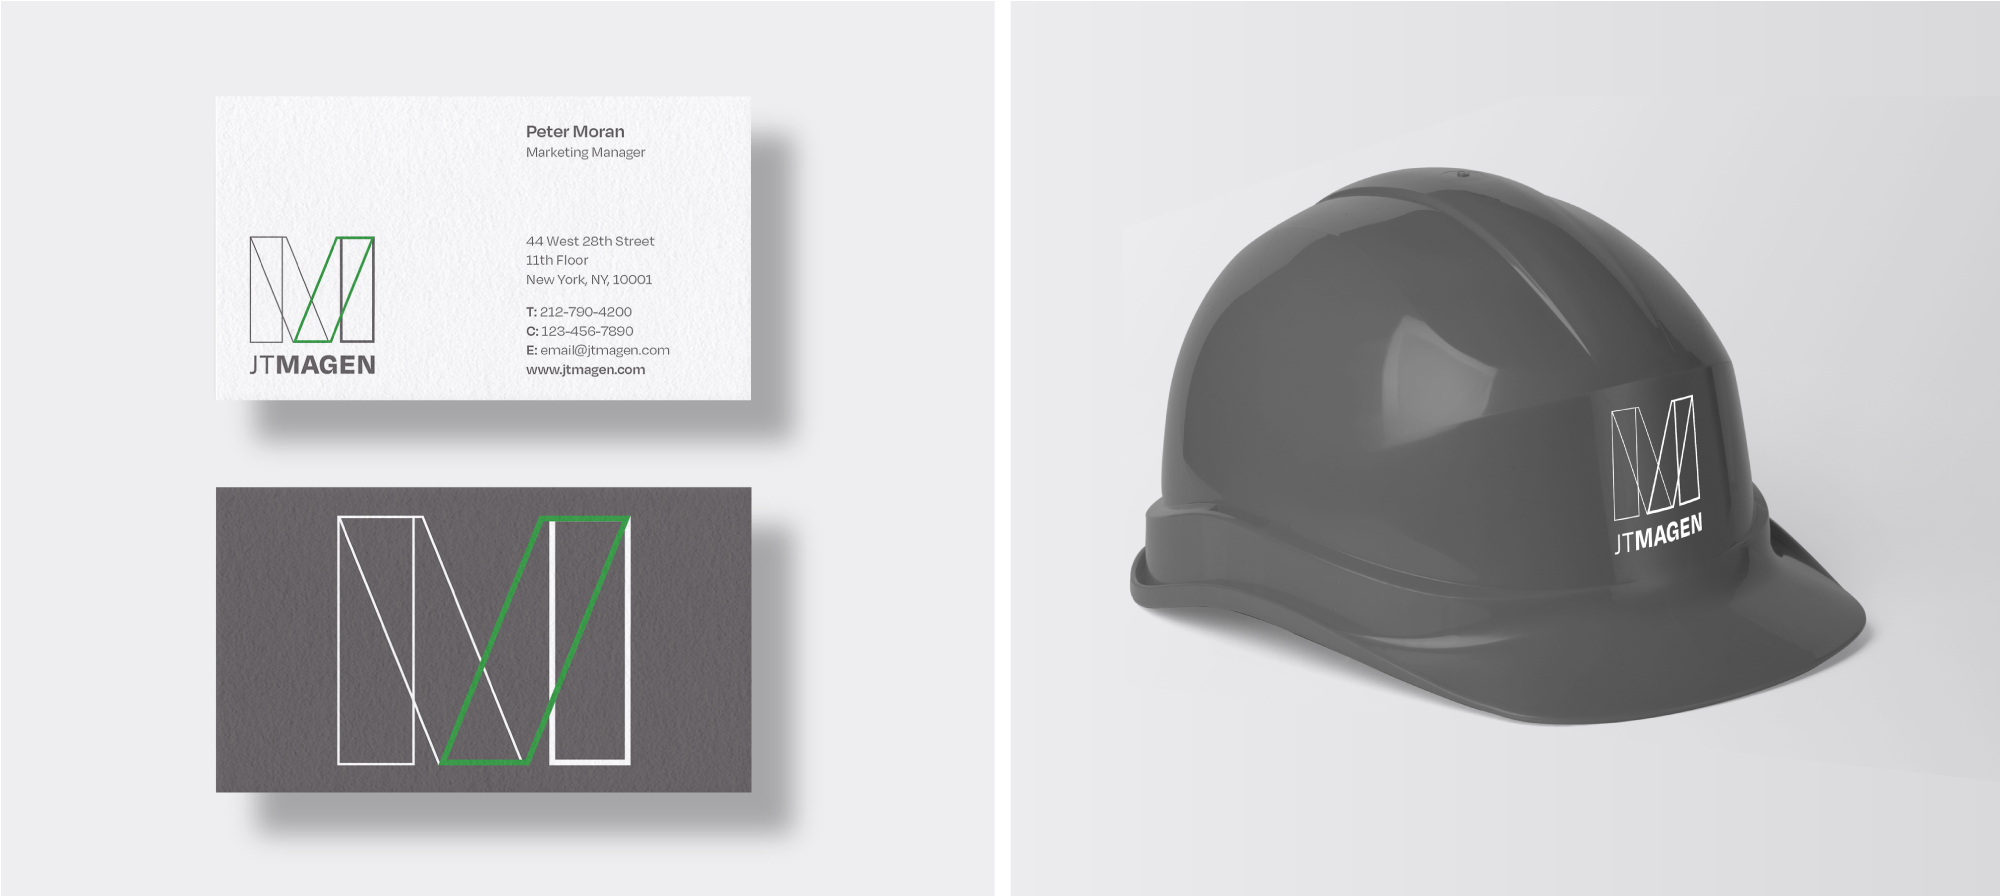 mockup of helmet and business cards with J.T. Magen logo on it